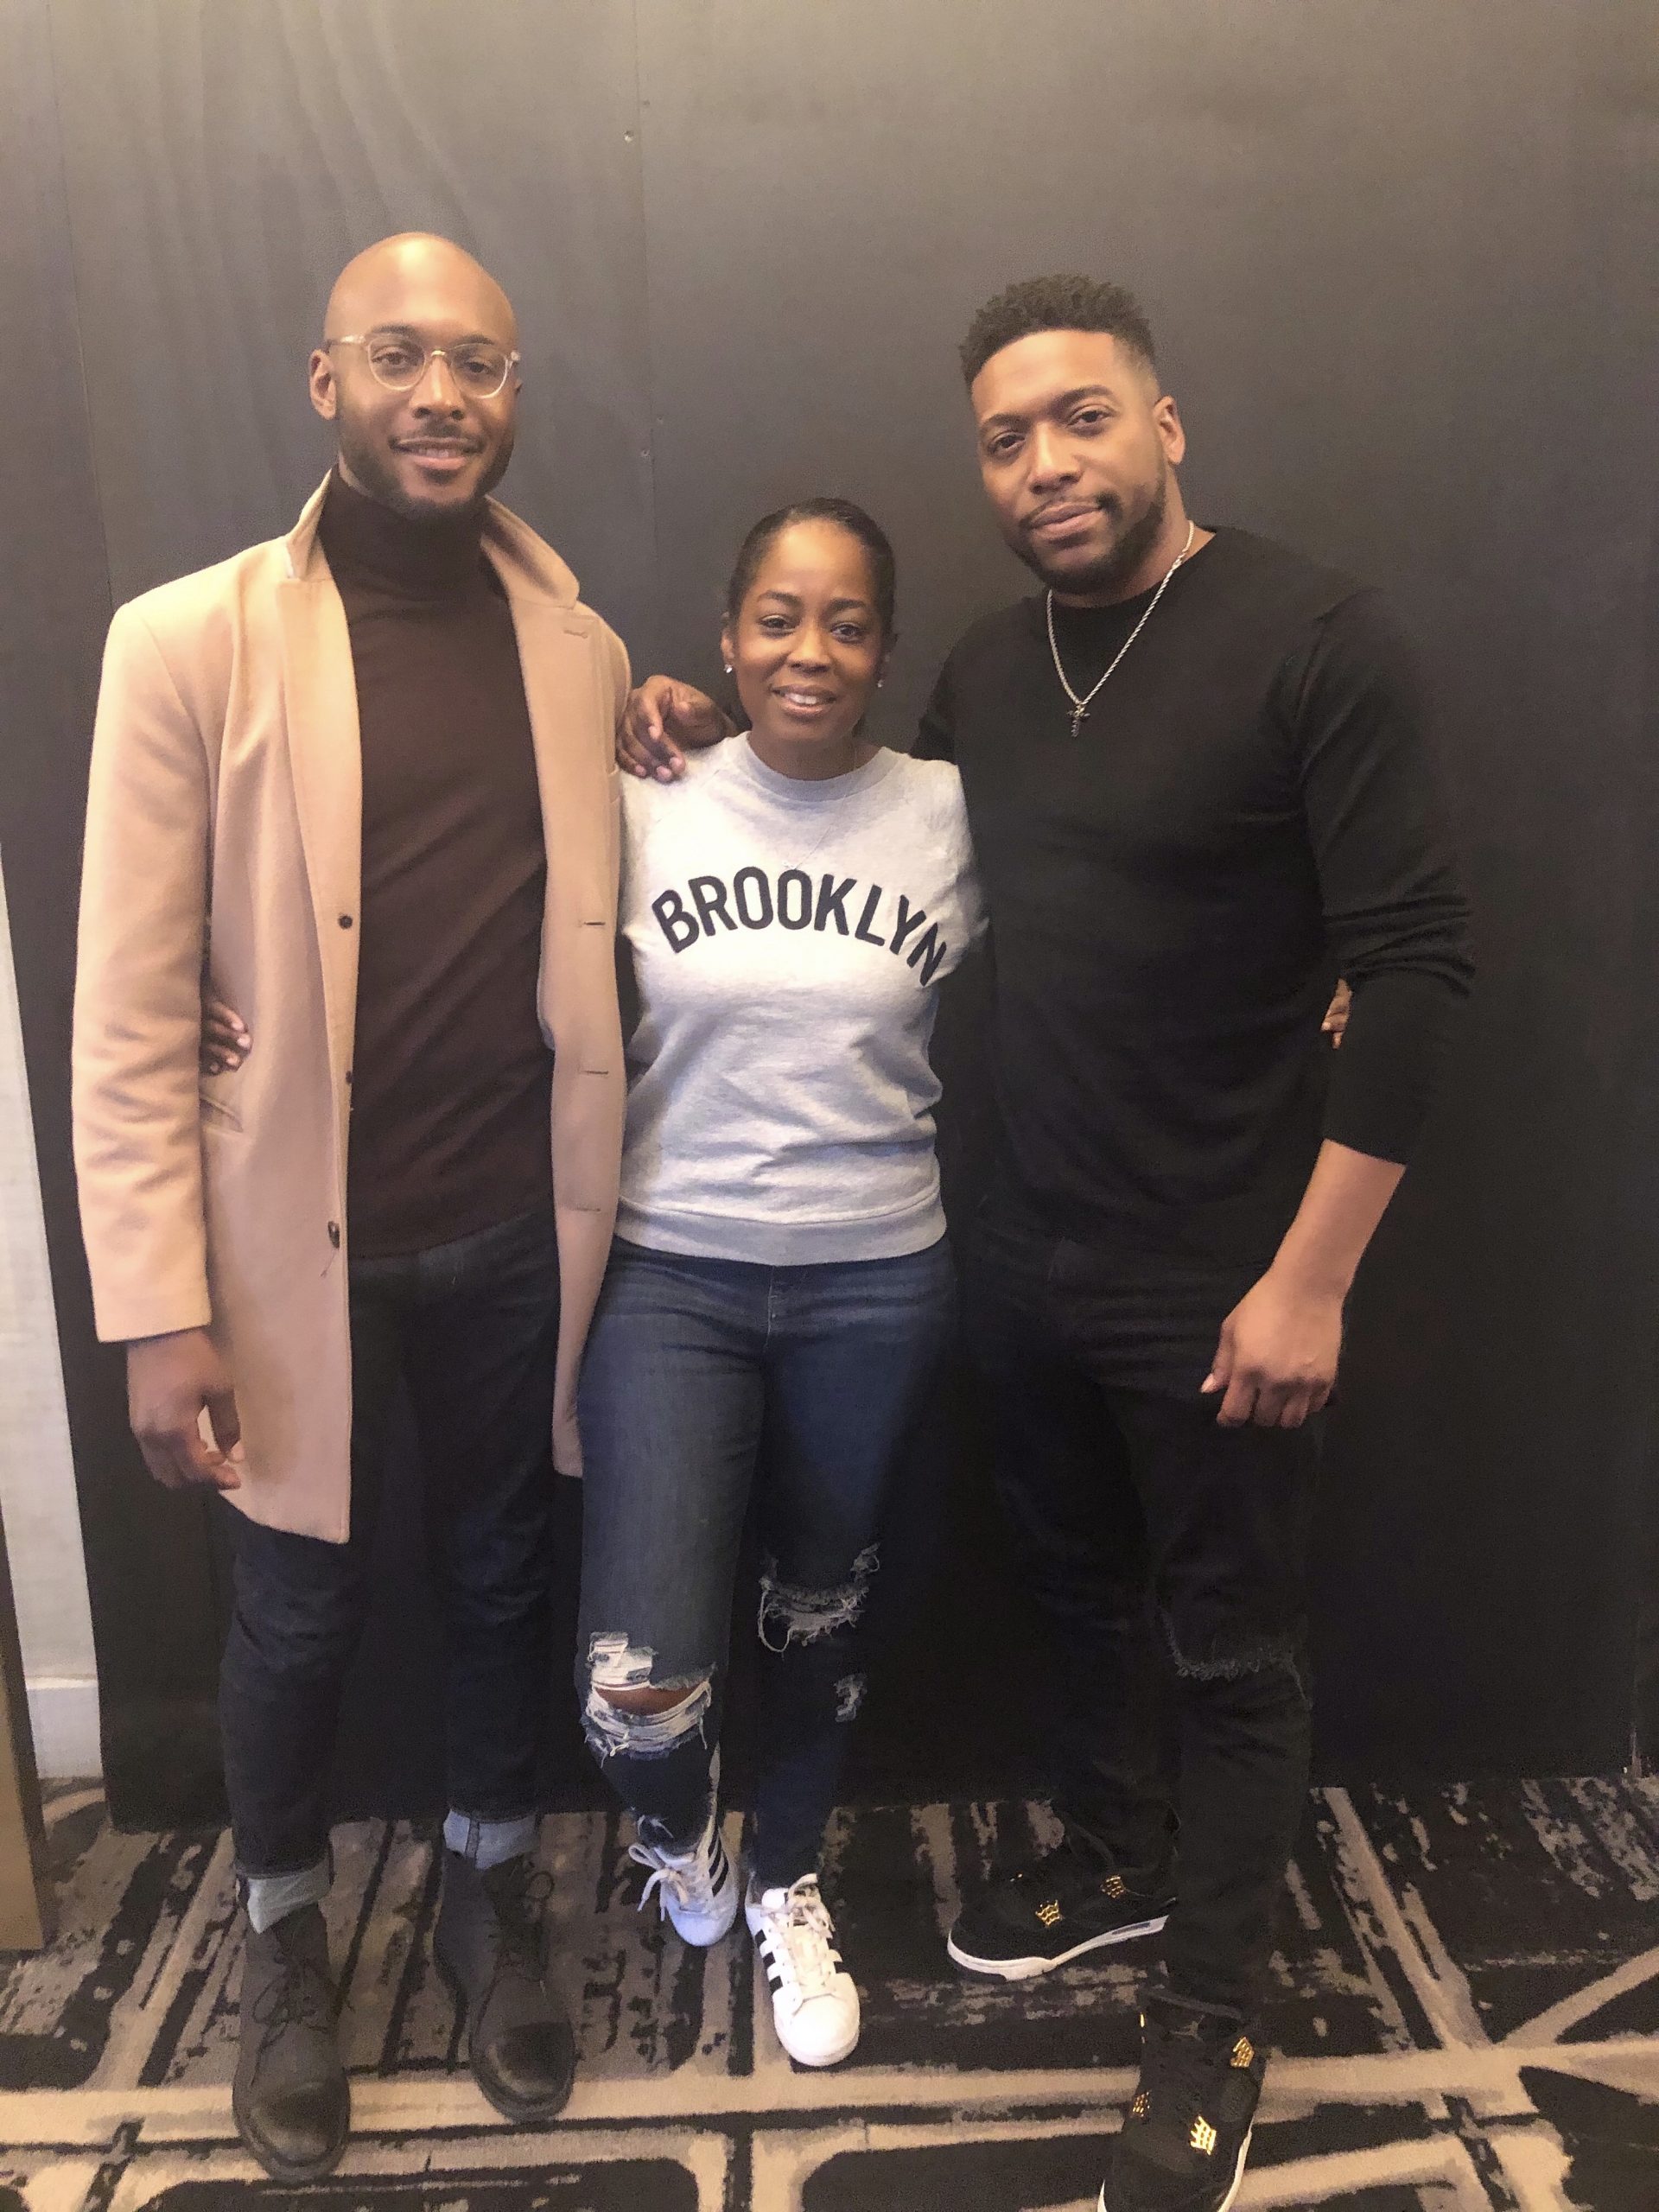 Round Table Discussion With Actor Jocko Sims & Screenwriter Jiréh Breon Holder From NBC’s New Amsterdam